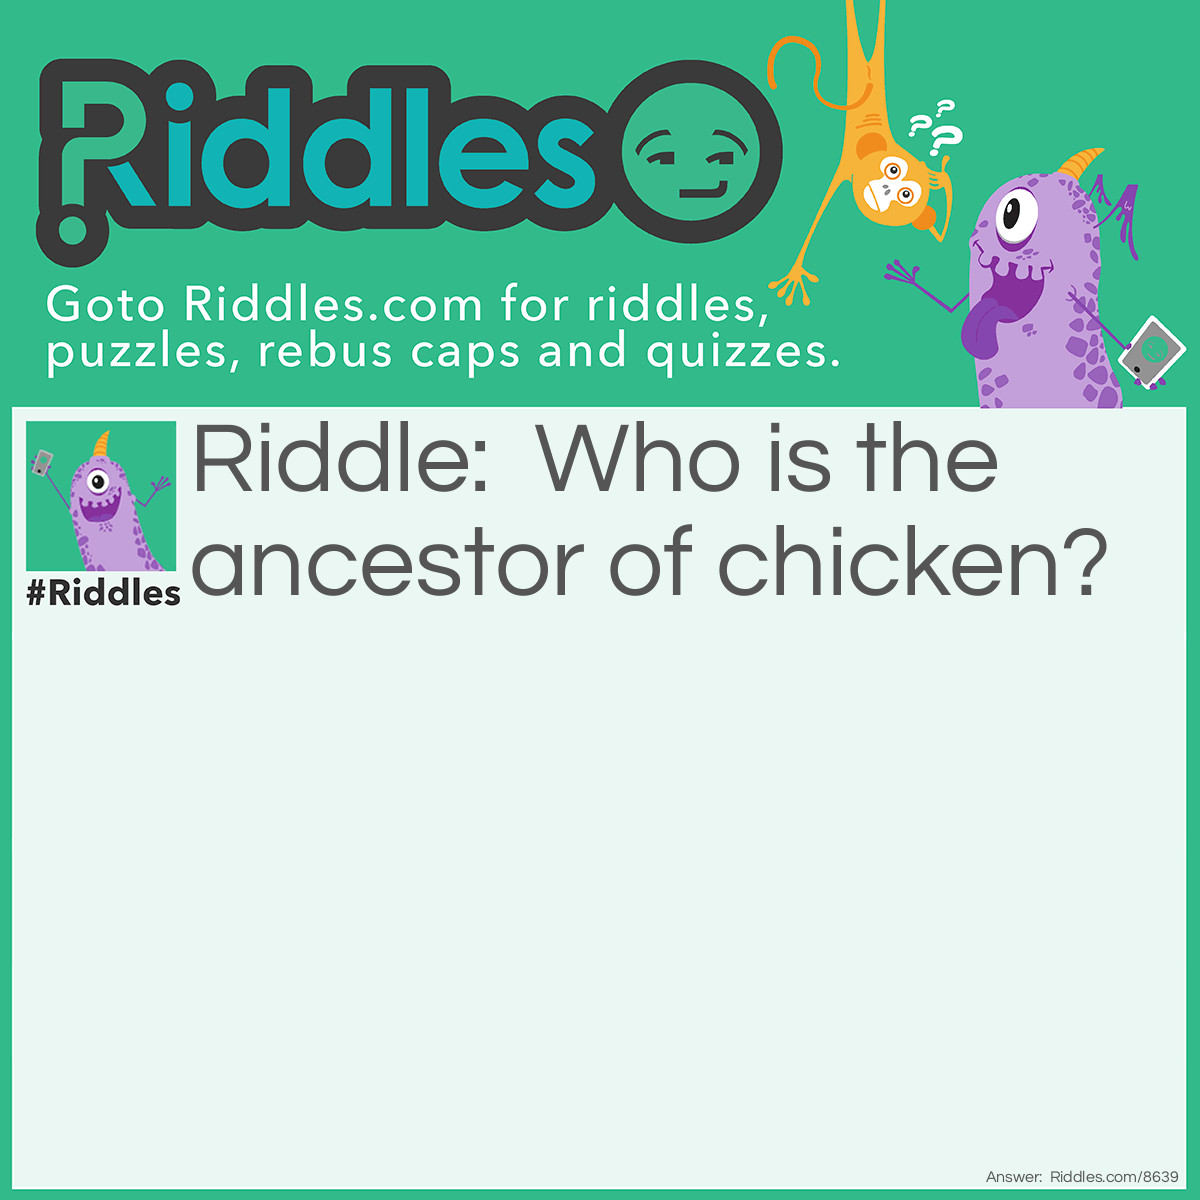 Riddle: Who is the ancestor of chicken? Answer: The archeopteryx.